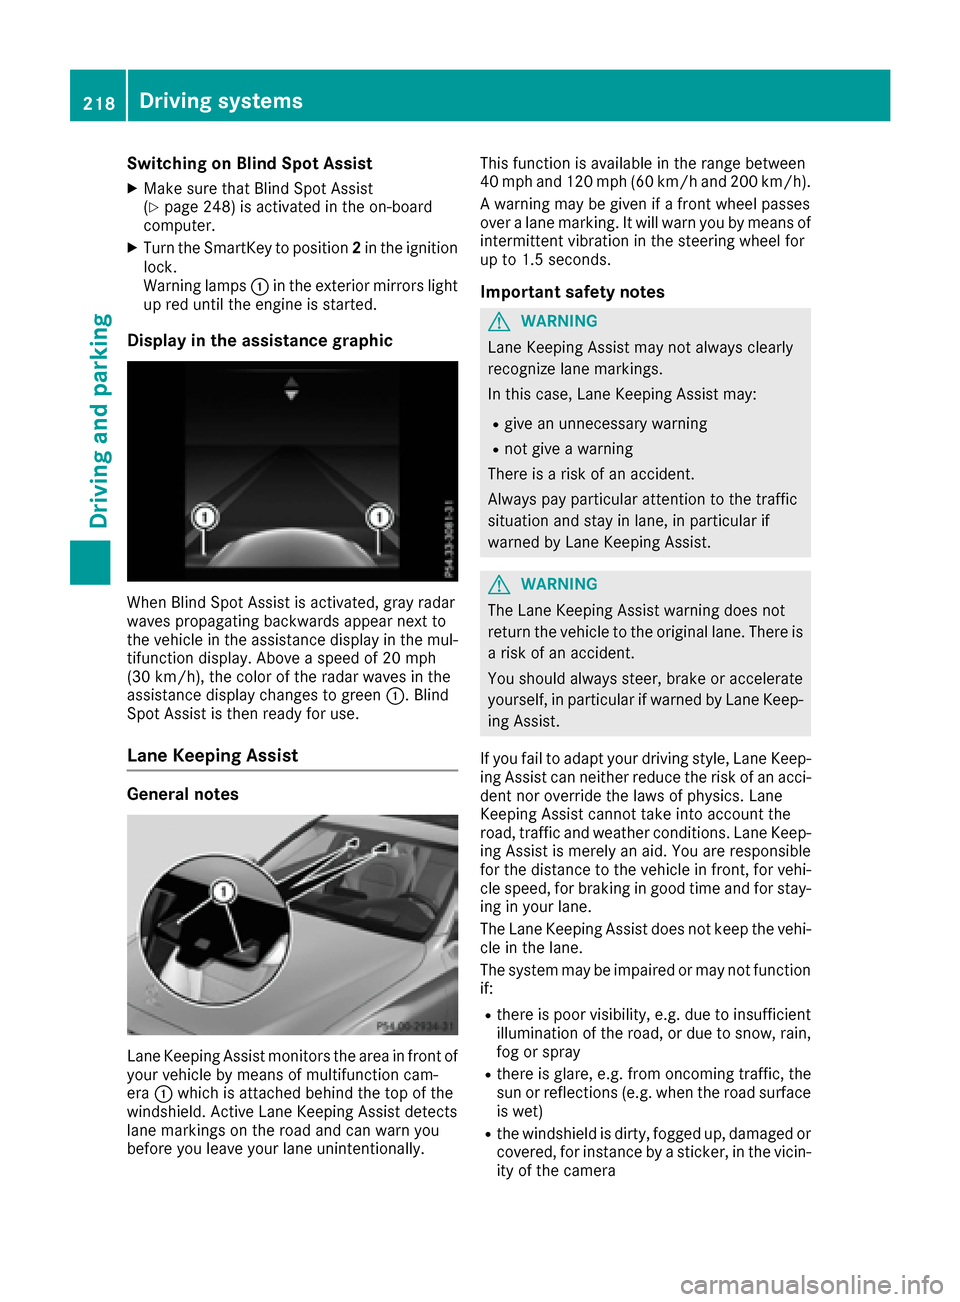 MERCEDES-BENZ C-Class SEDAN 2016 W205 User Guide Switching on Blind Spot Assist
XMake sure that Blind Spot Assist
(Ypage 248) is activated in the on-board
computer.
XTurn the SmartKey to position 2in the ignition
lock.
Warning lamps :in the exterior